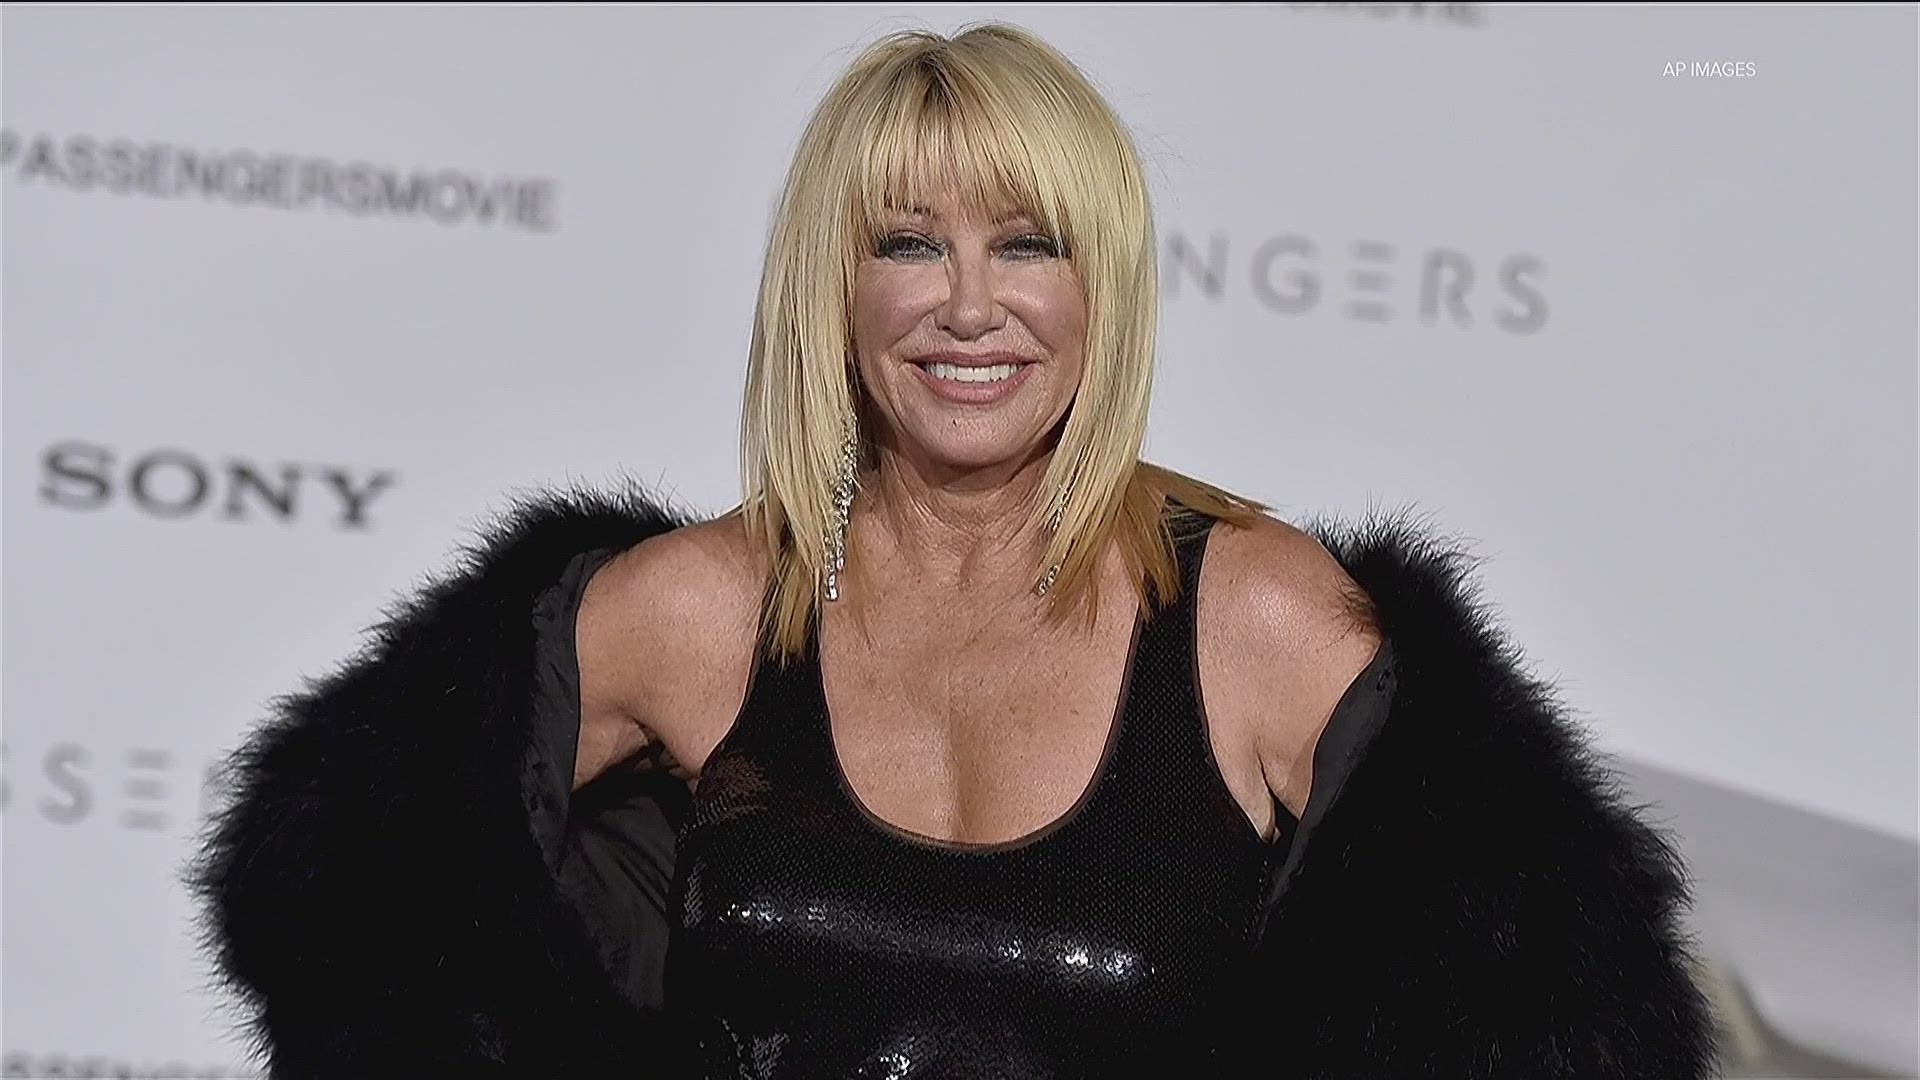 Suzanne Somers wearing a black top and black fur coat